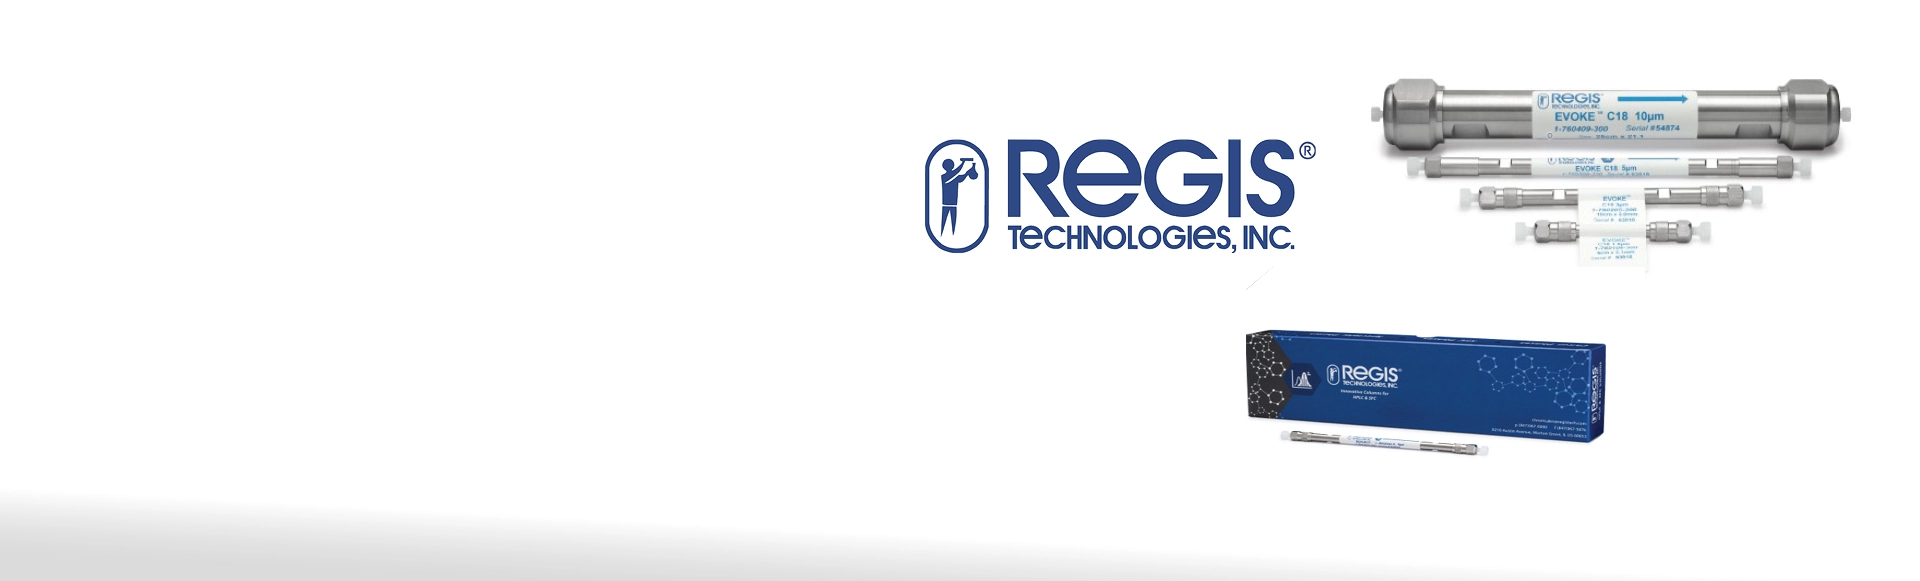 Chromatography products from Regis Technologies